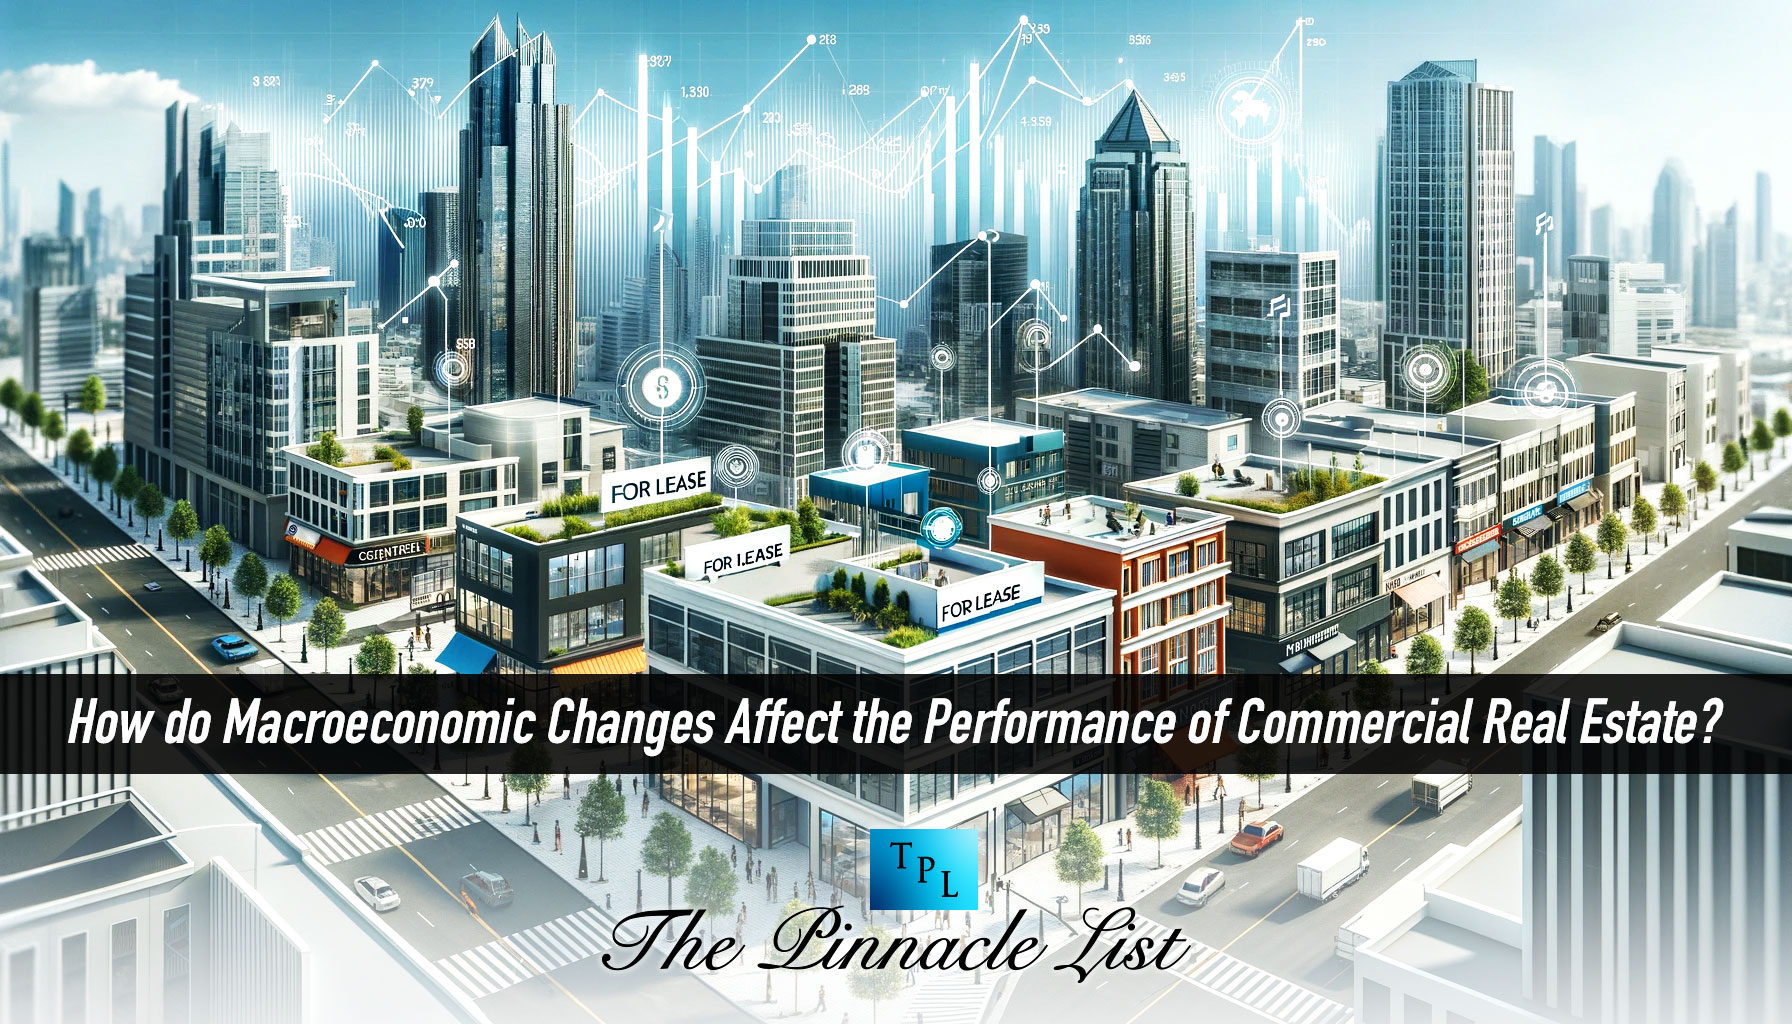 How do Macroeconomic Changes Affect the Performance of Commercial Real Estate?